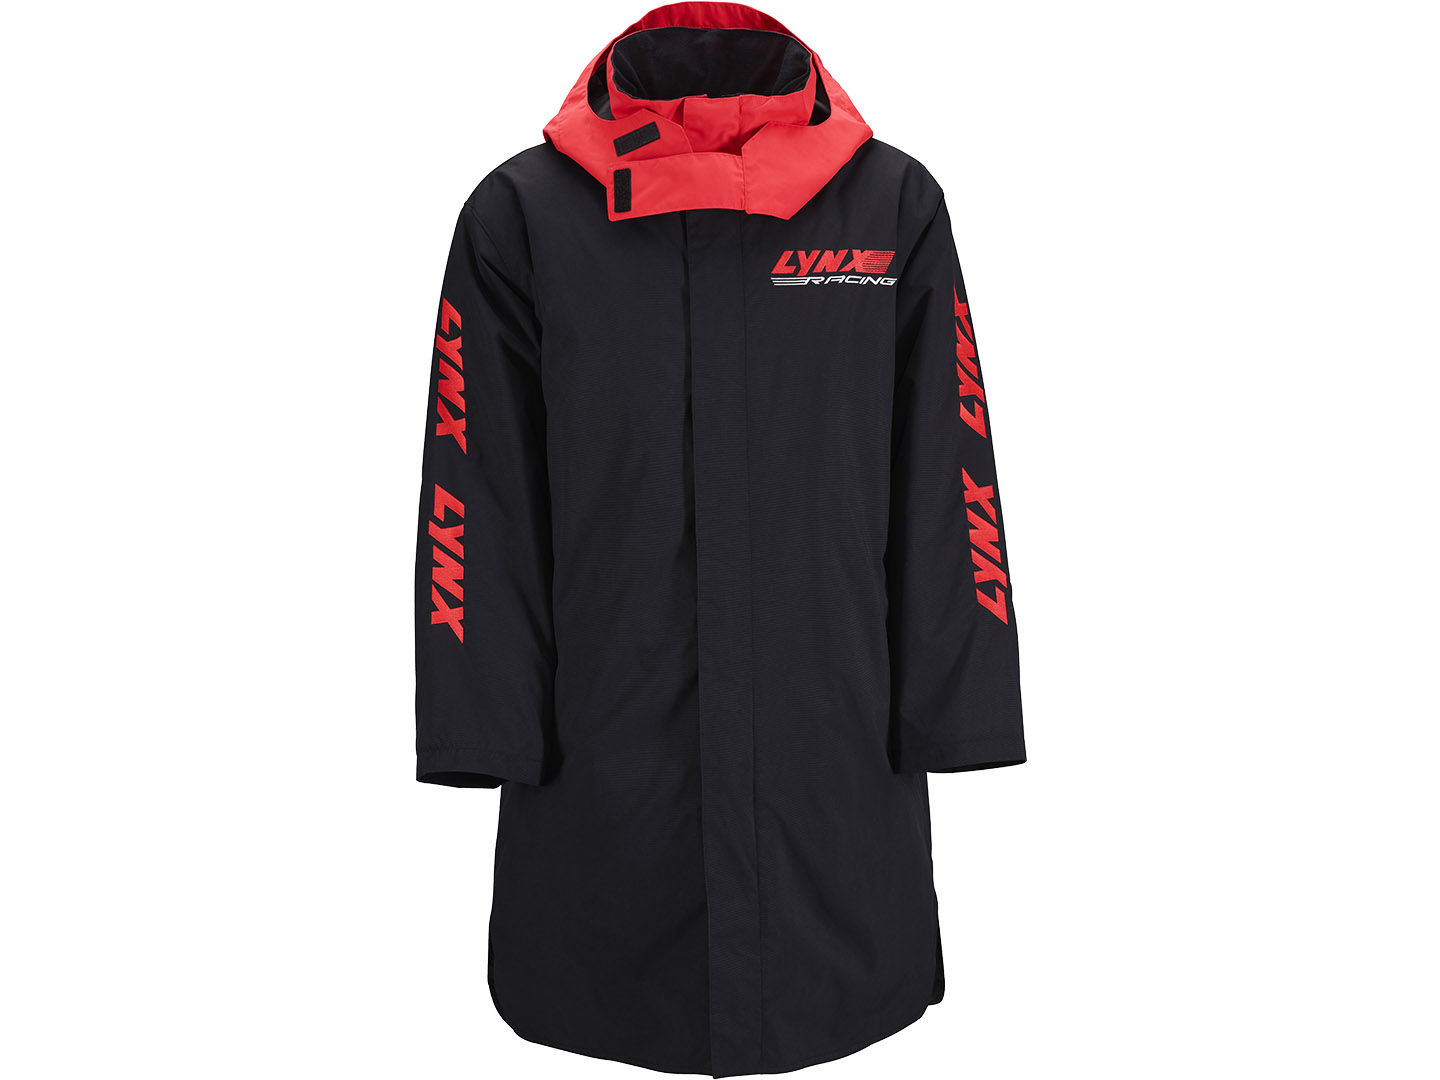 Black and red Lynx Warm-up Jacket